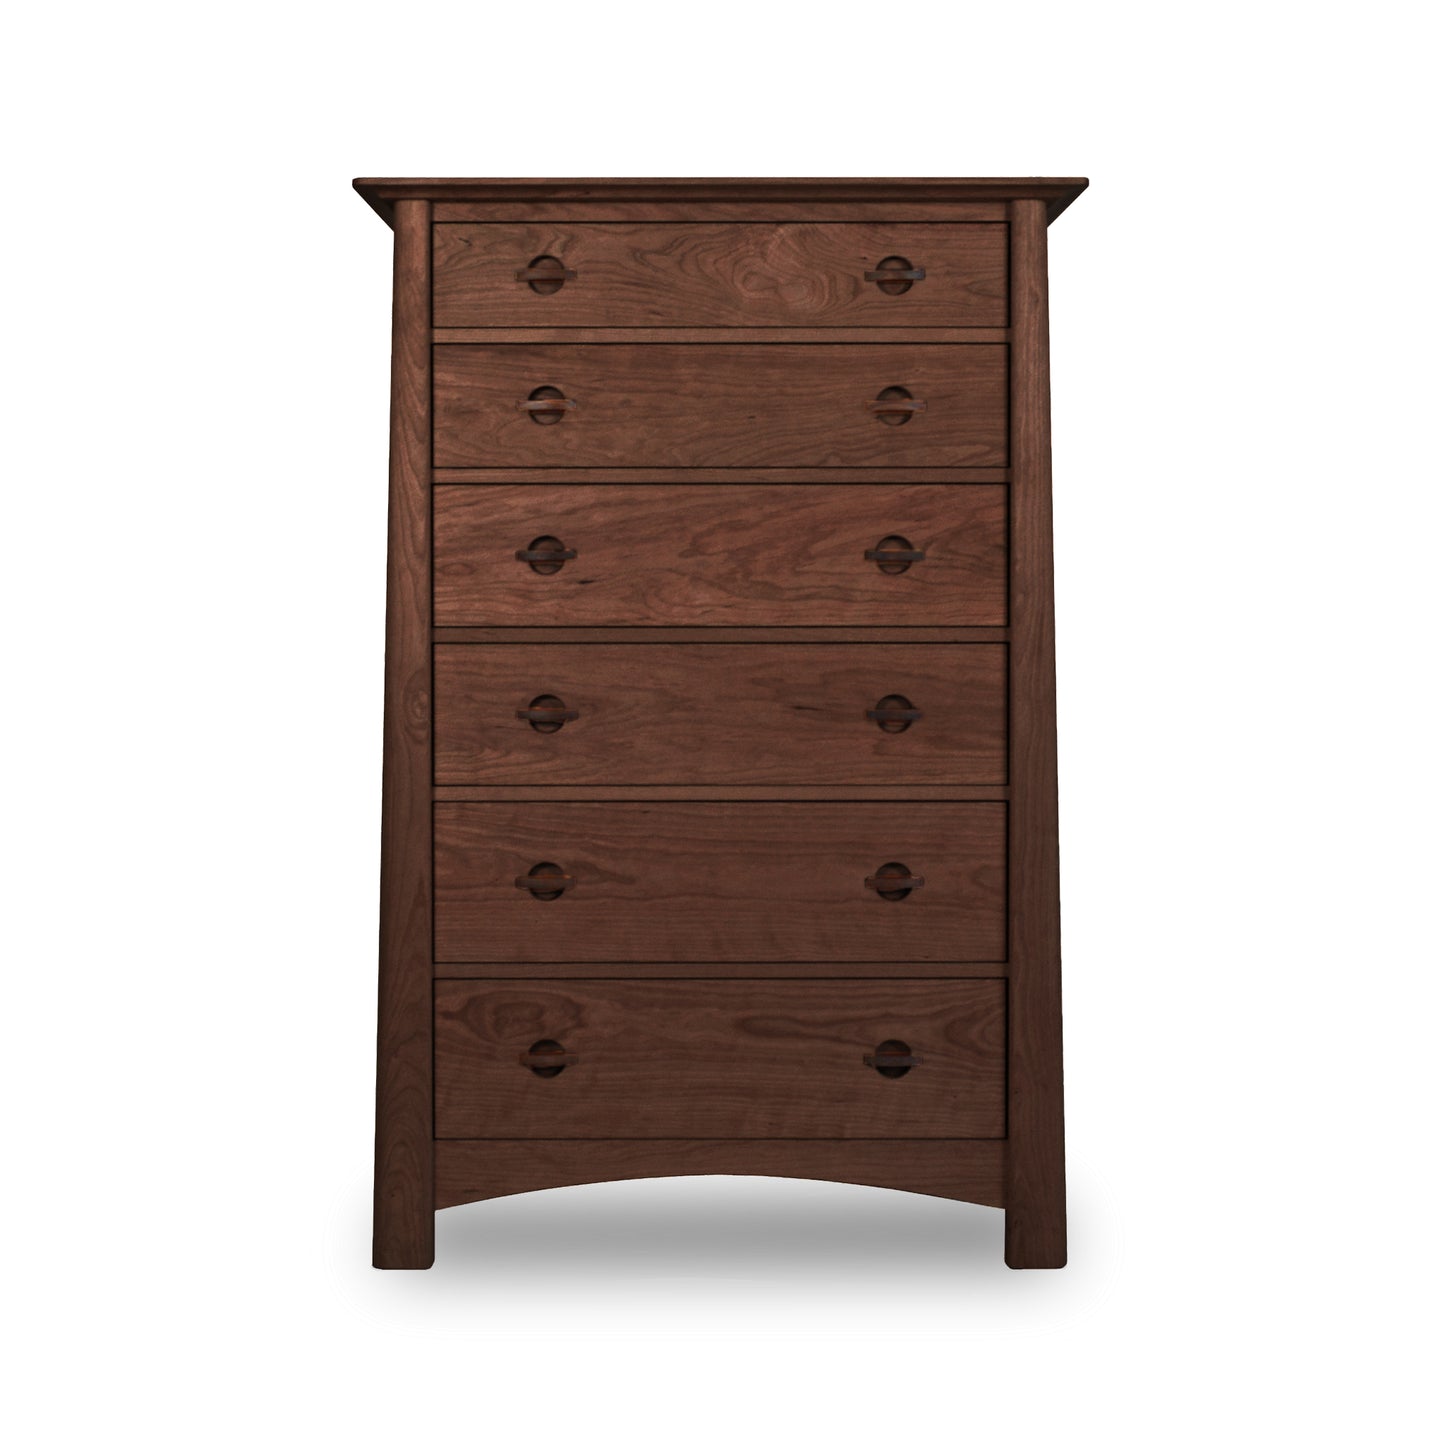 A Cherry Moon 6-Drawer Chest, part of the eco-friendly bedroom furniture collection from Maple Corner Woodworks, is isolated on a white background.